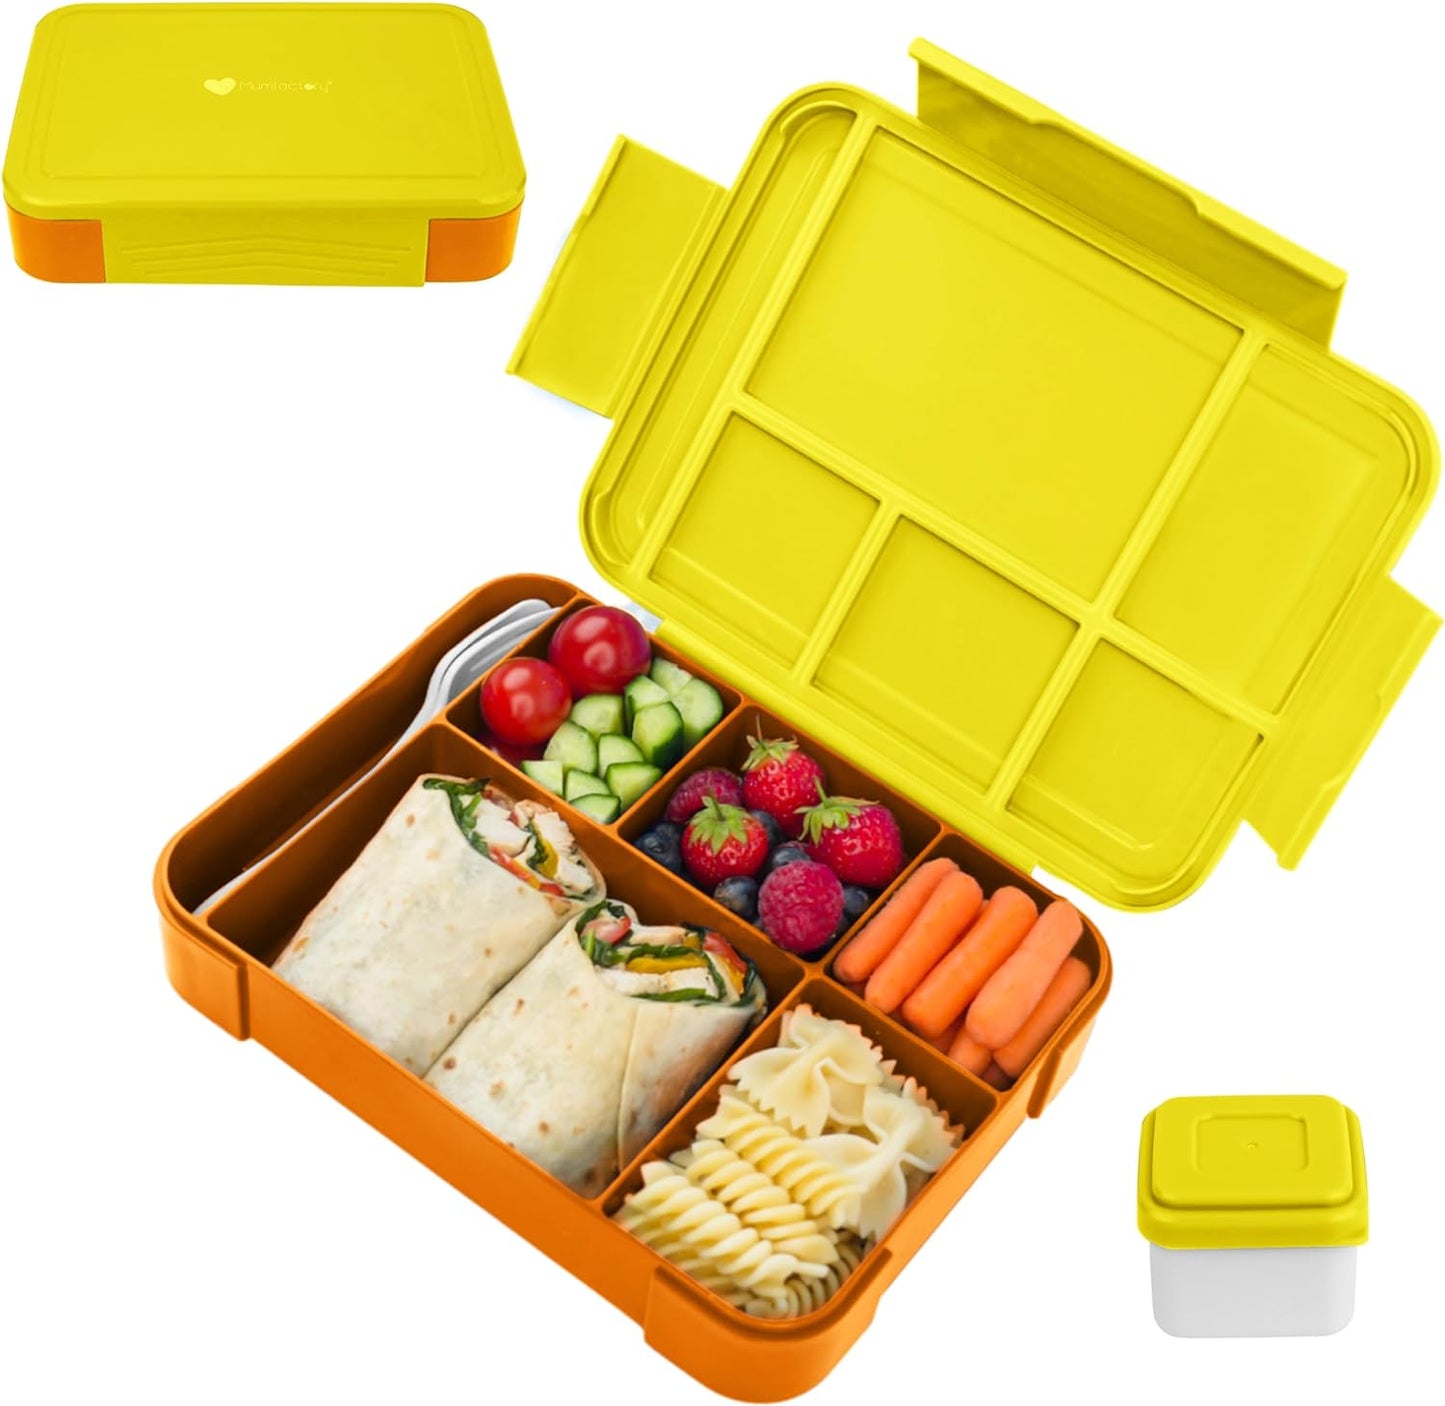 Lunch Box for Kids - 5 Compartments